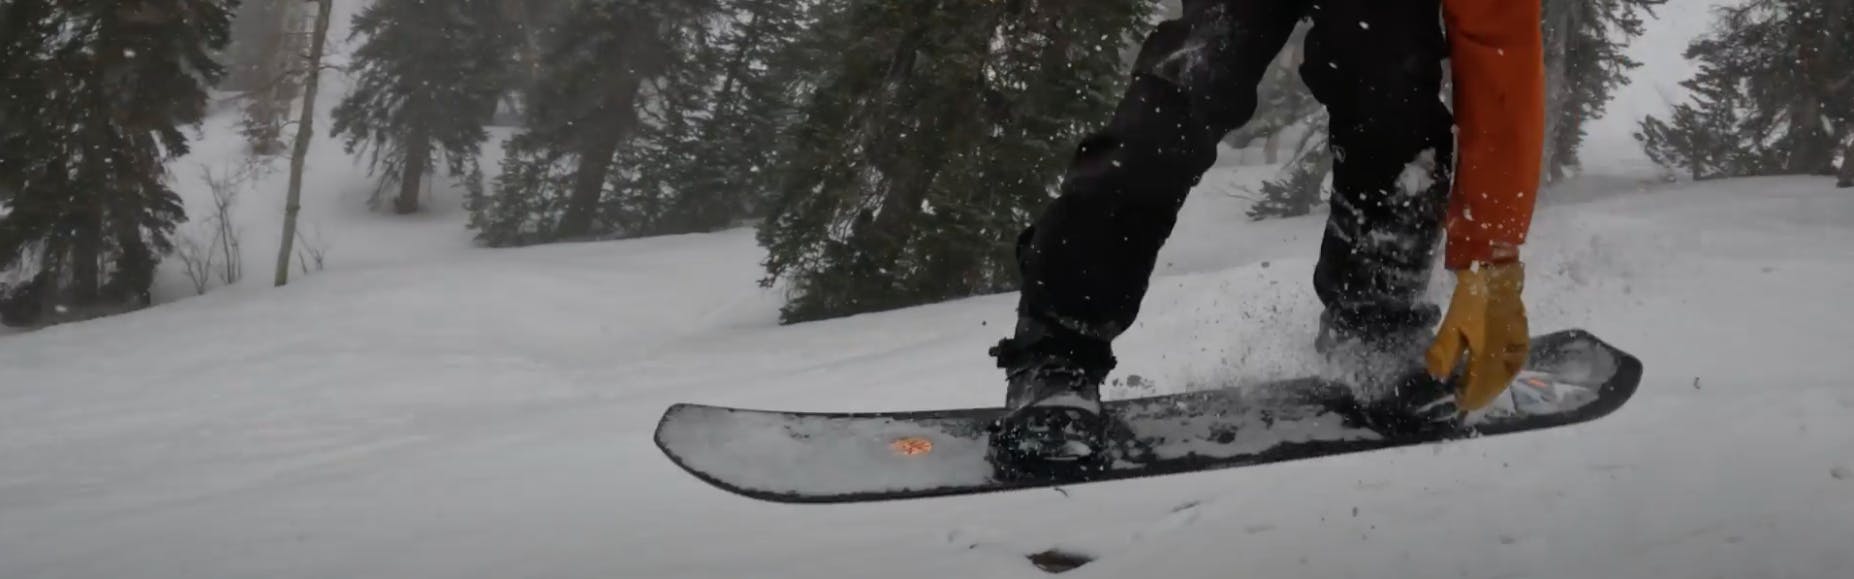 A snowboarder jumping with the 2023 Salomon Highpath snowboard